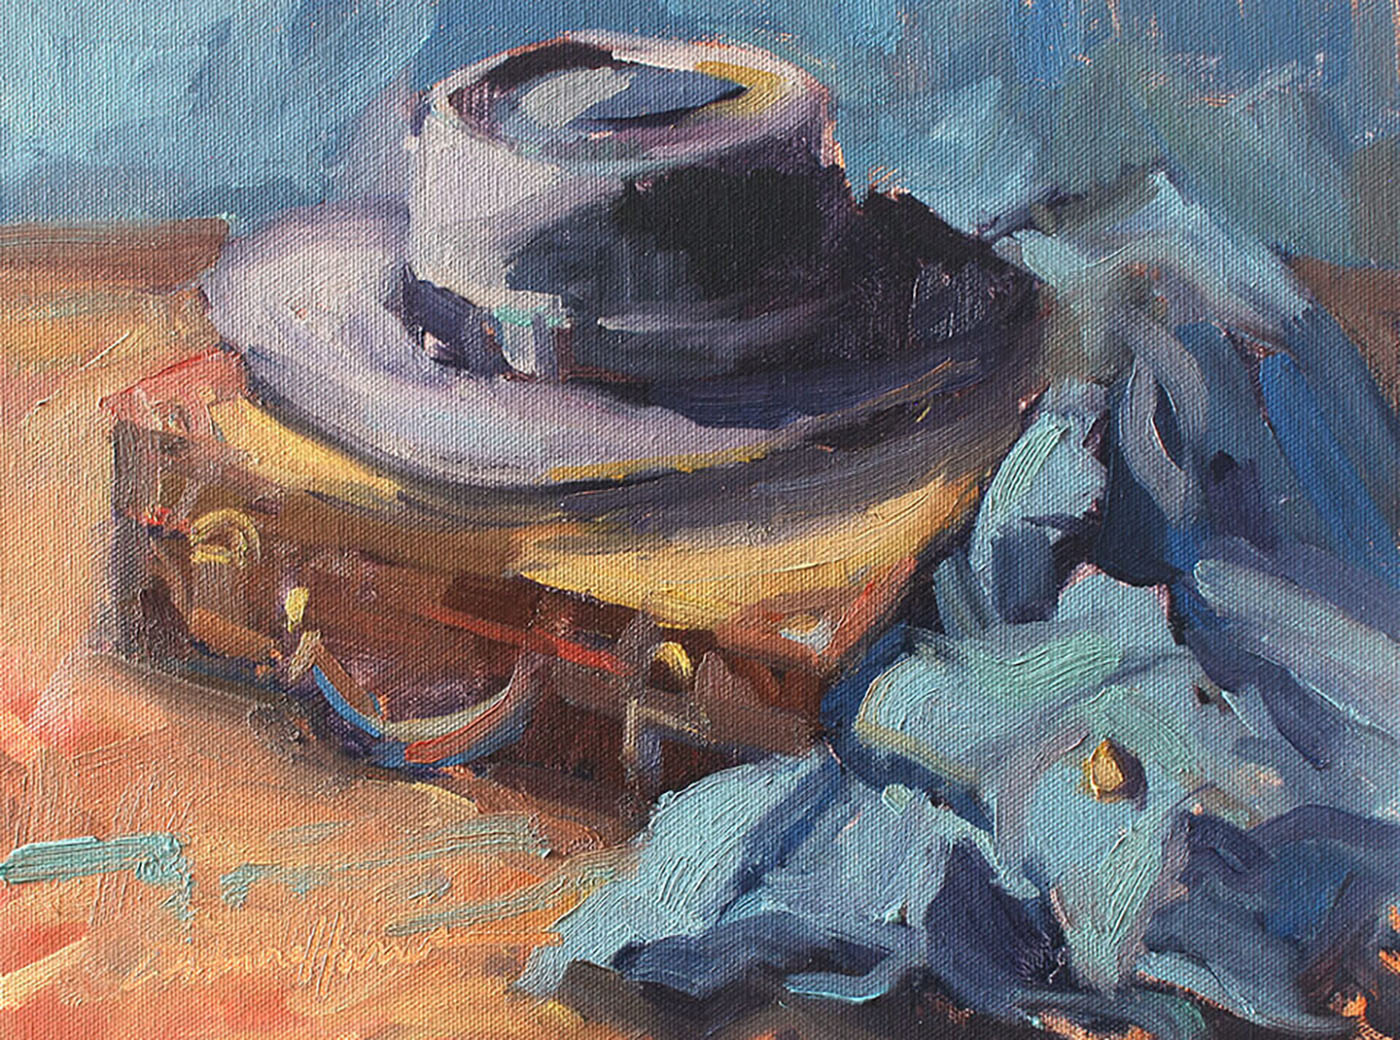 oil painting of still life objects: hat, briefcase and coat